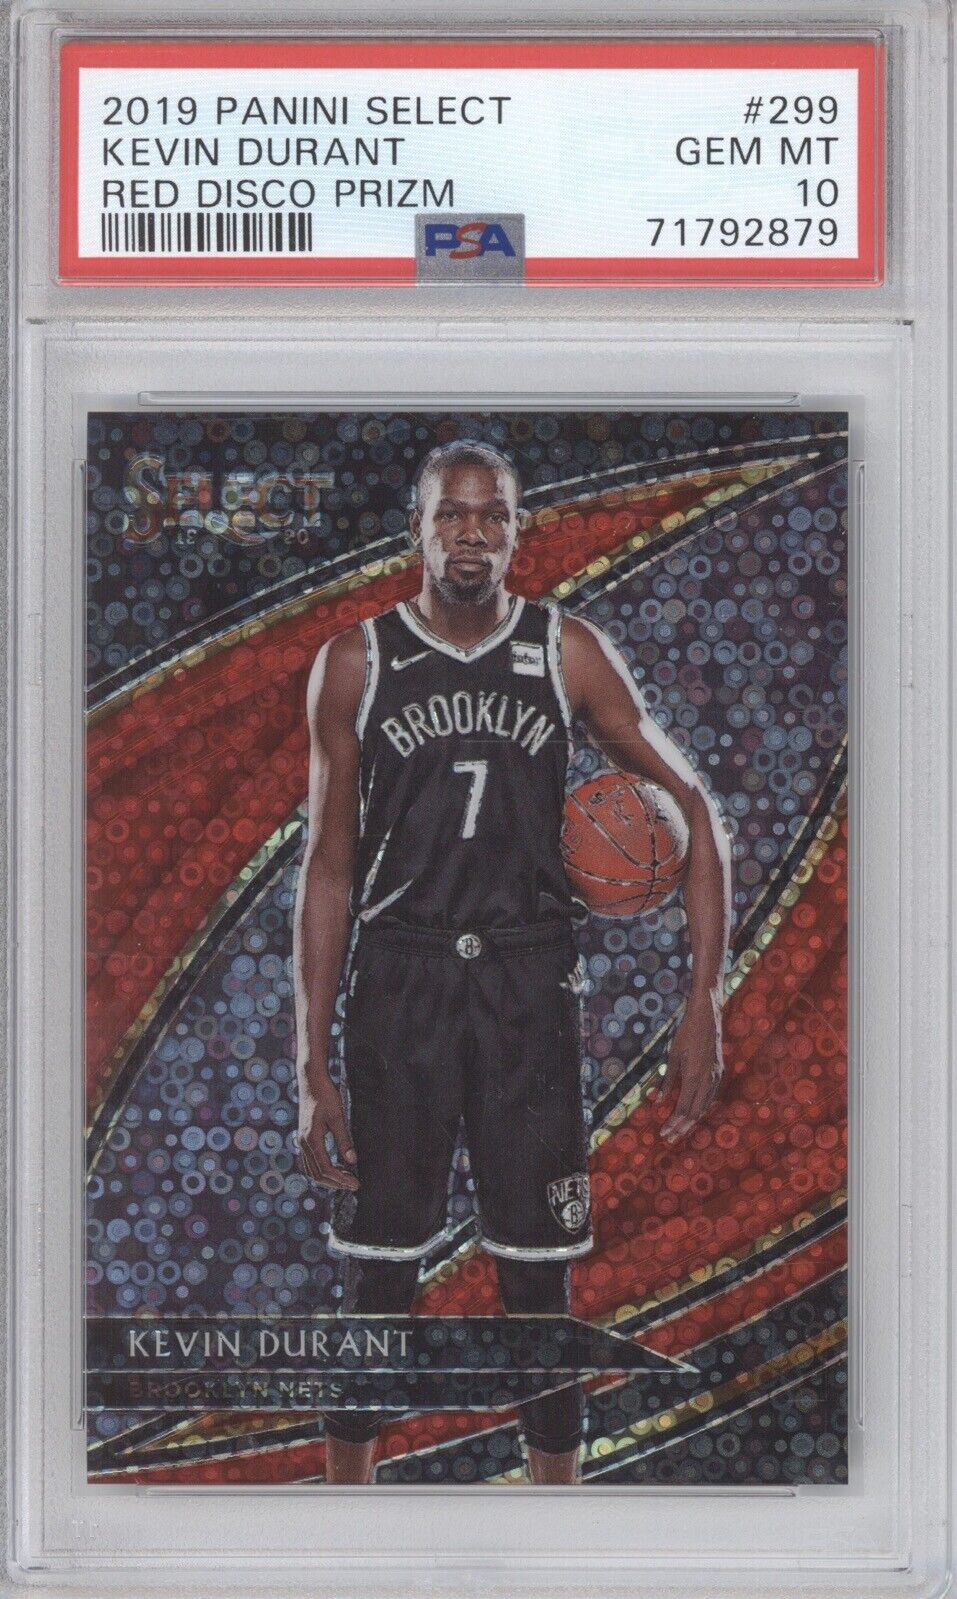 KEVIN DURANT PSA 10 2019 PANINI SELECT #299 RED DISCO PRIZM 9/49 NETS